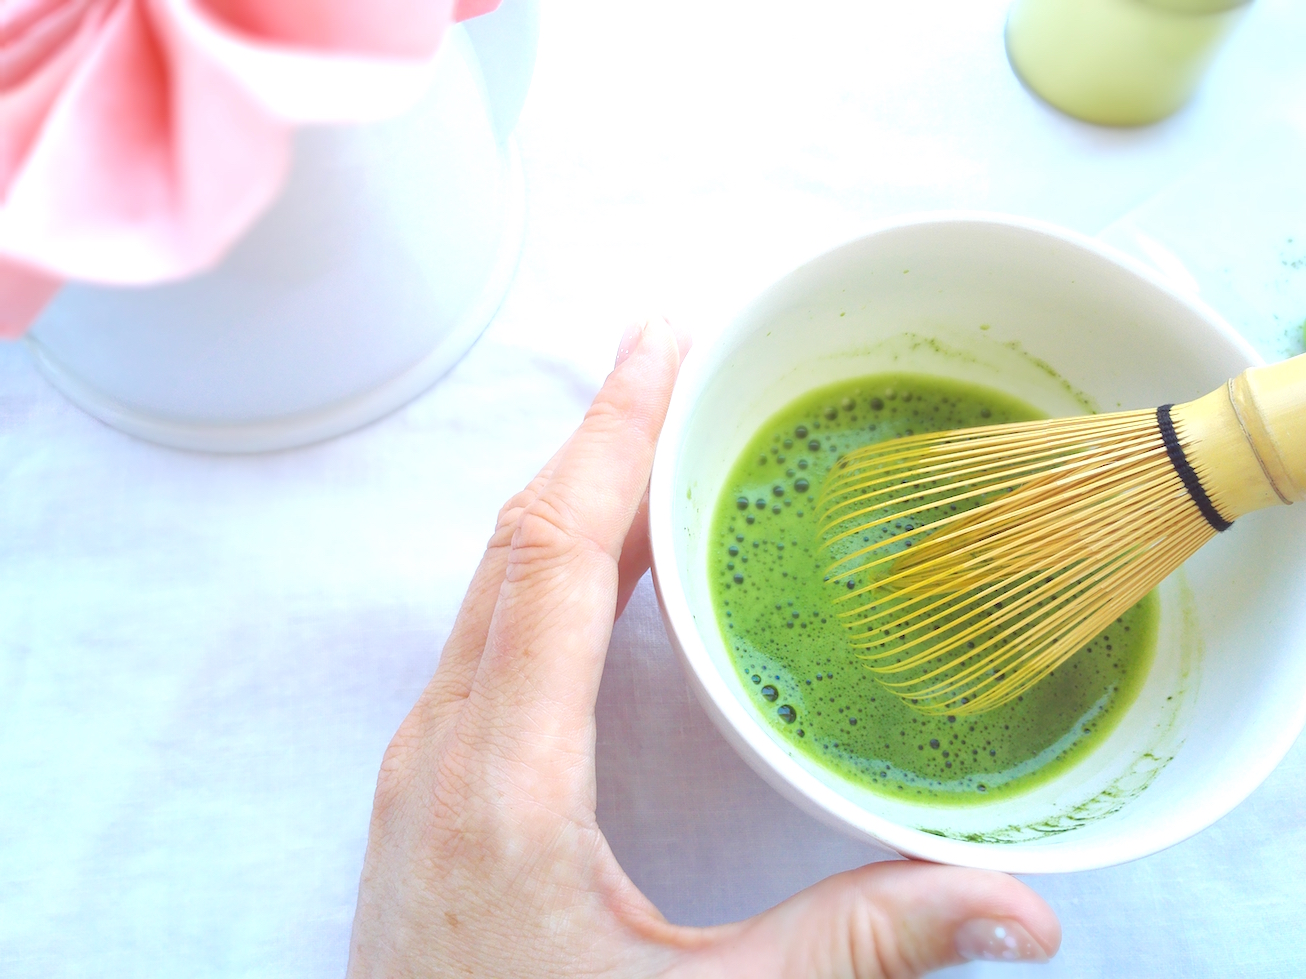 Frothing the matcha is fun and you can do it in while chatting with your friends which adds an element of uniqueness to the whole tea making process